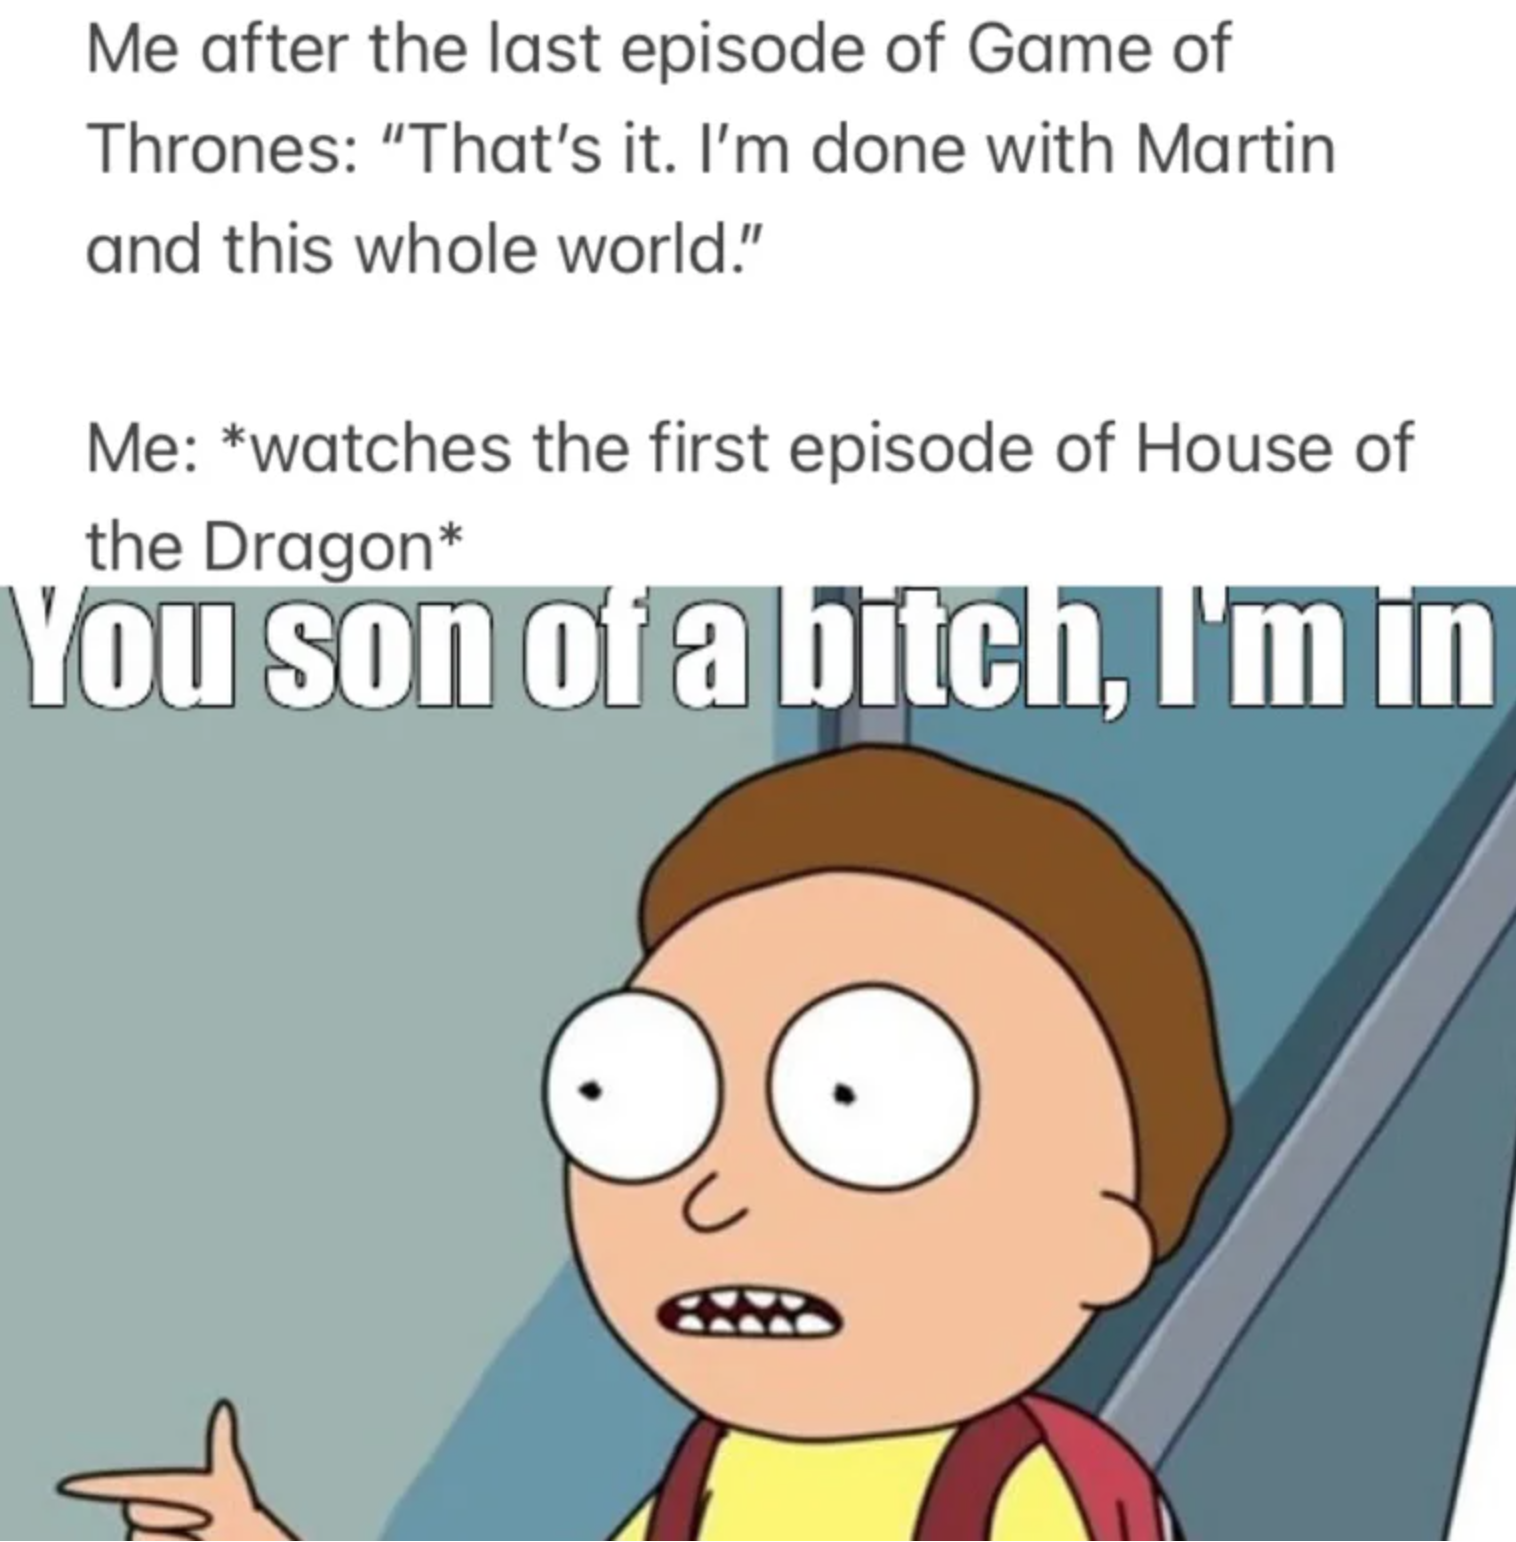 cartoon - Me after the last episode of Game of Thrones "That's it. I'm done with Martin and this whole world." Me watches the first episode of House of the Dragon You son of a bitch, I'm in T